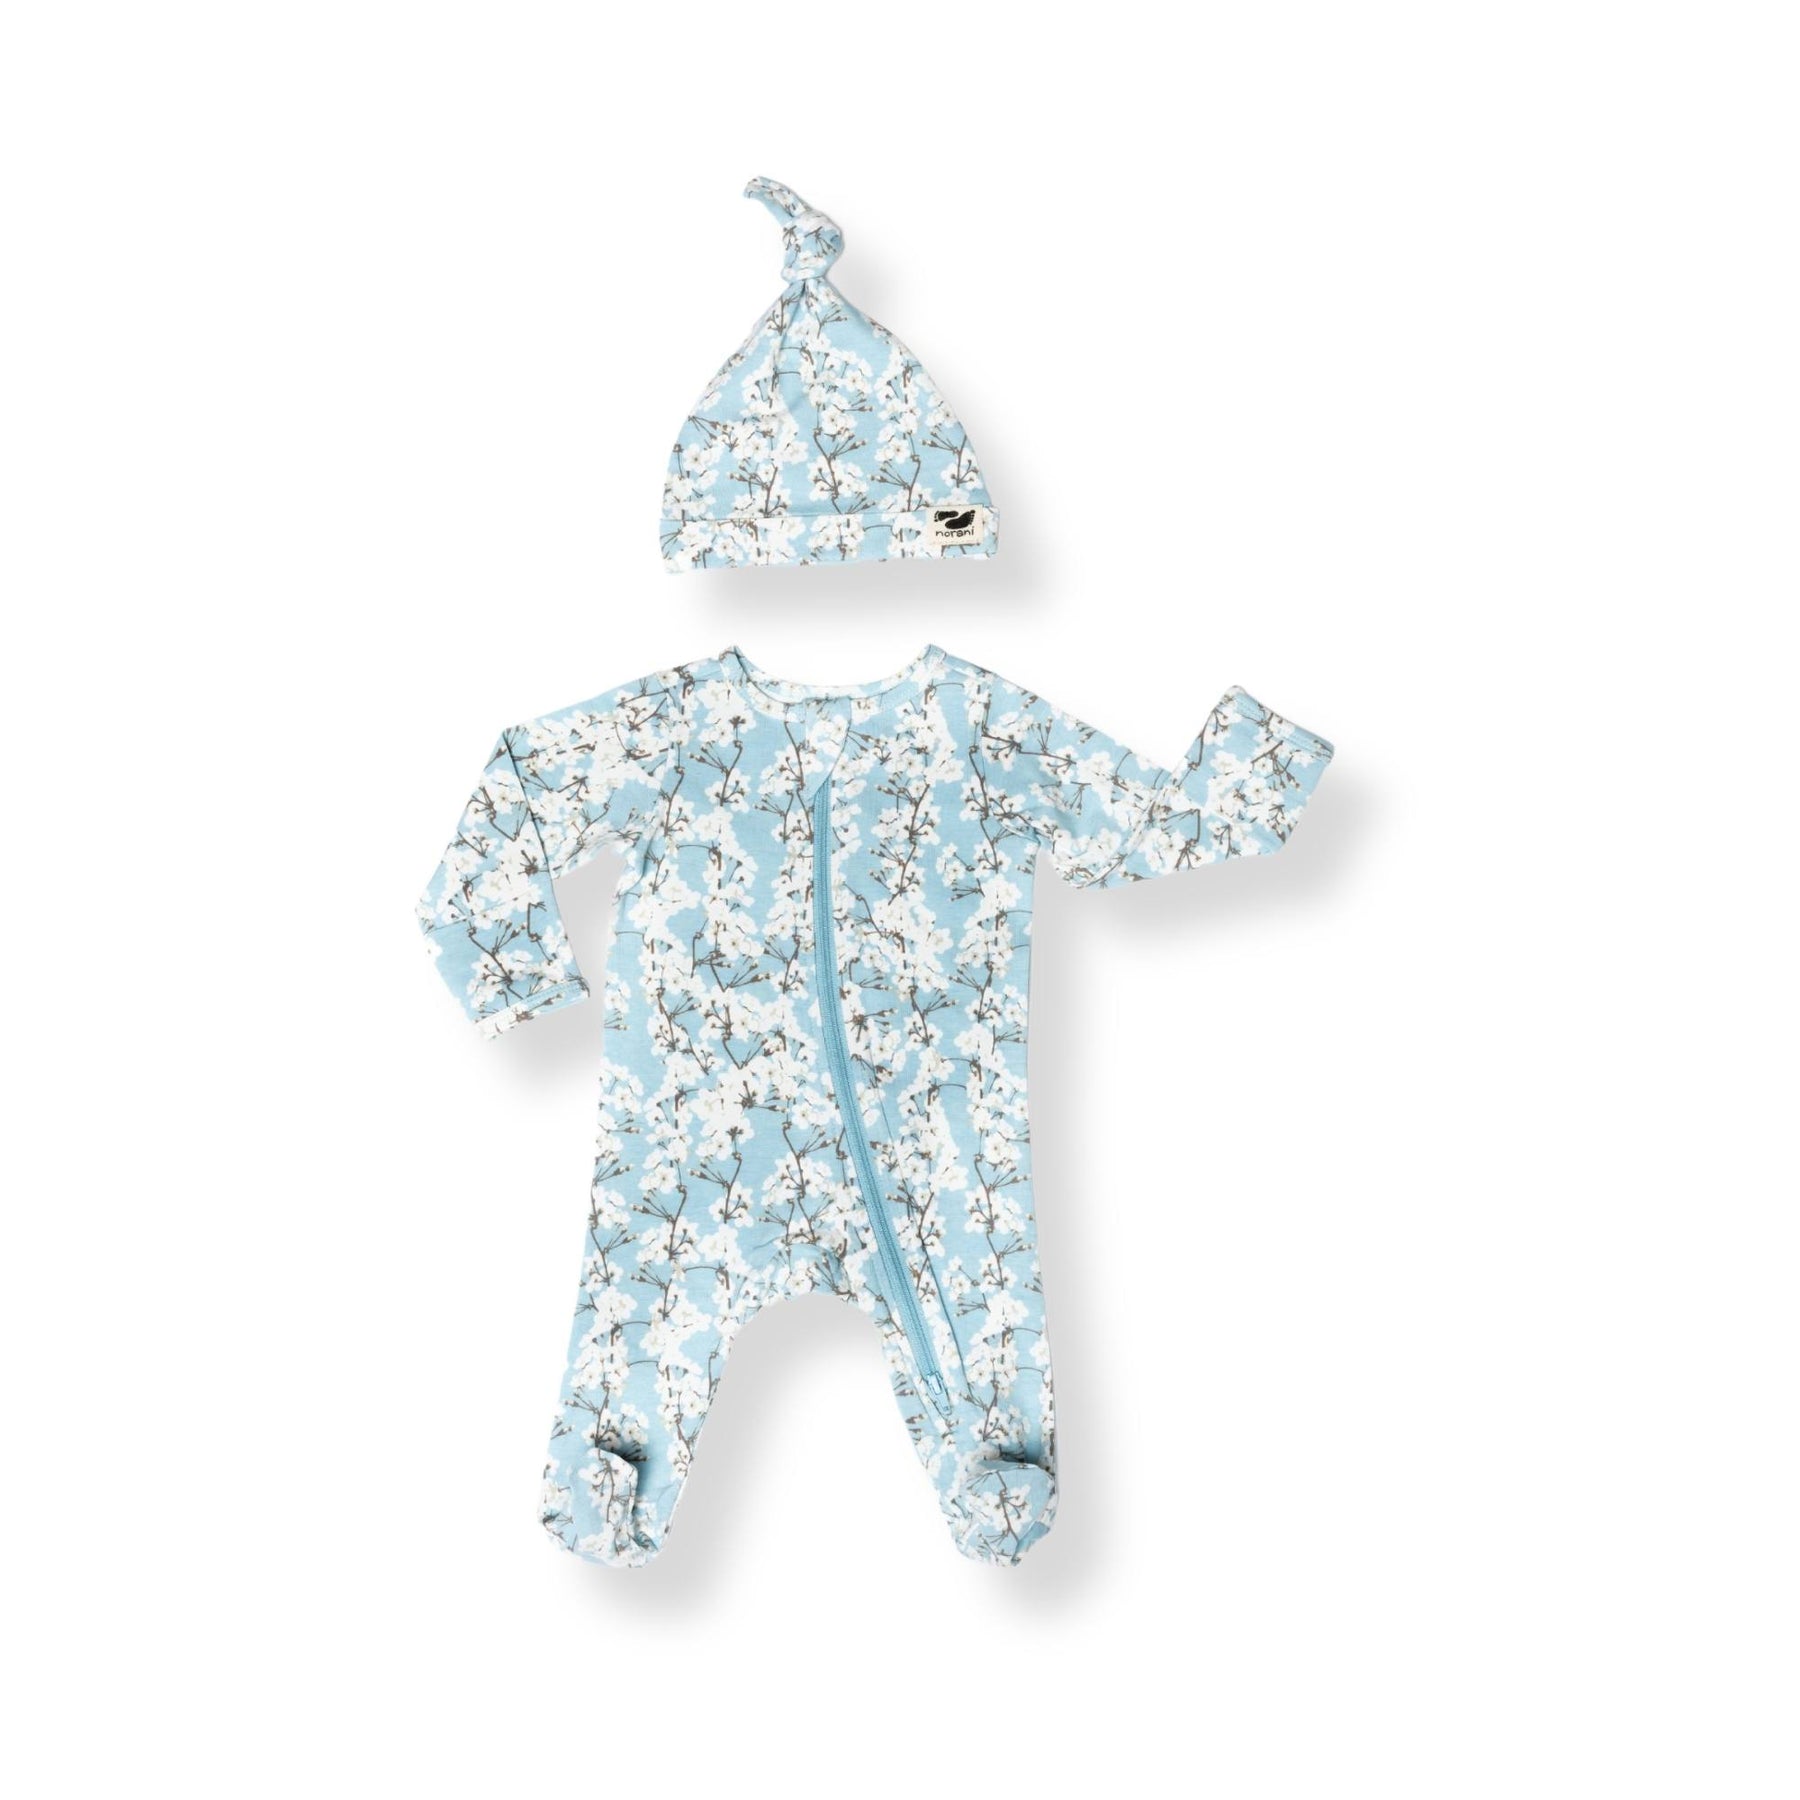 Norani Baby footed zippered onesie in blue and white cherry blossom flowers